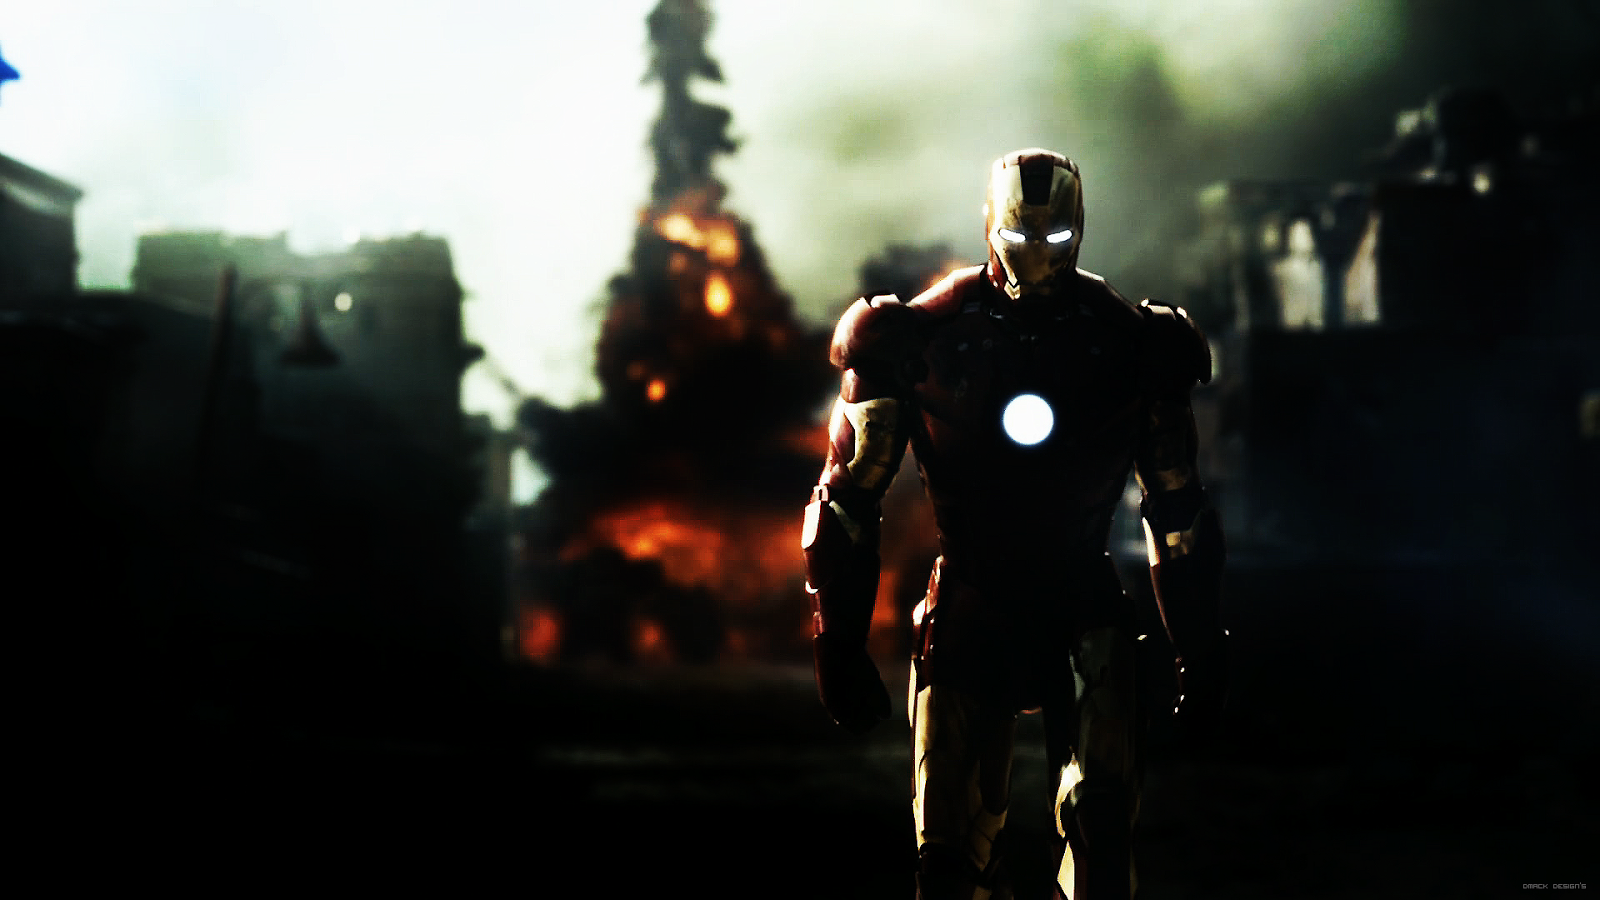 Download Iron Man HD Wallpapers | Iron Man 3 Official ...